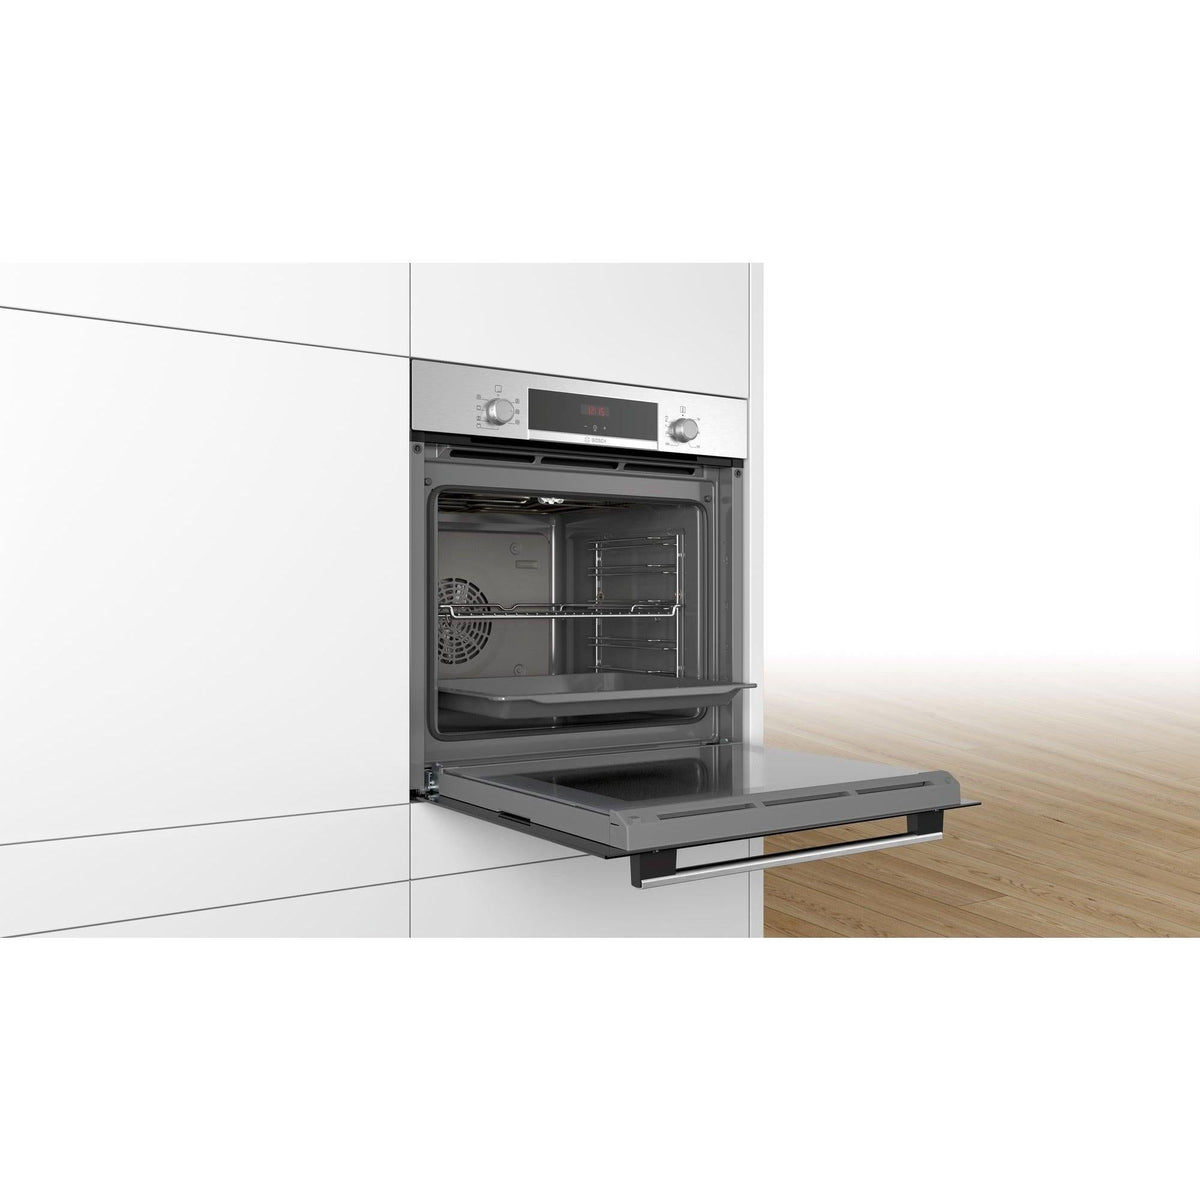 Bosch Serie 4 Built-In Multifunction Electric Single Oven - Stainless Steel | HBS534BS0B from DID Electrical - guaranteed Irish, guaranteed quality service. (6977414496444)